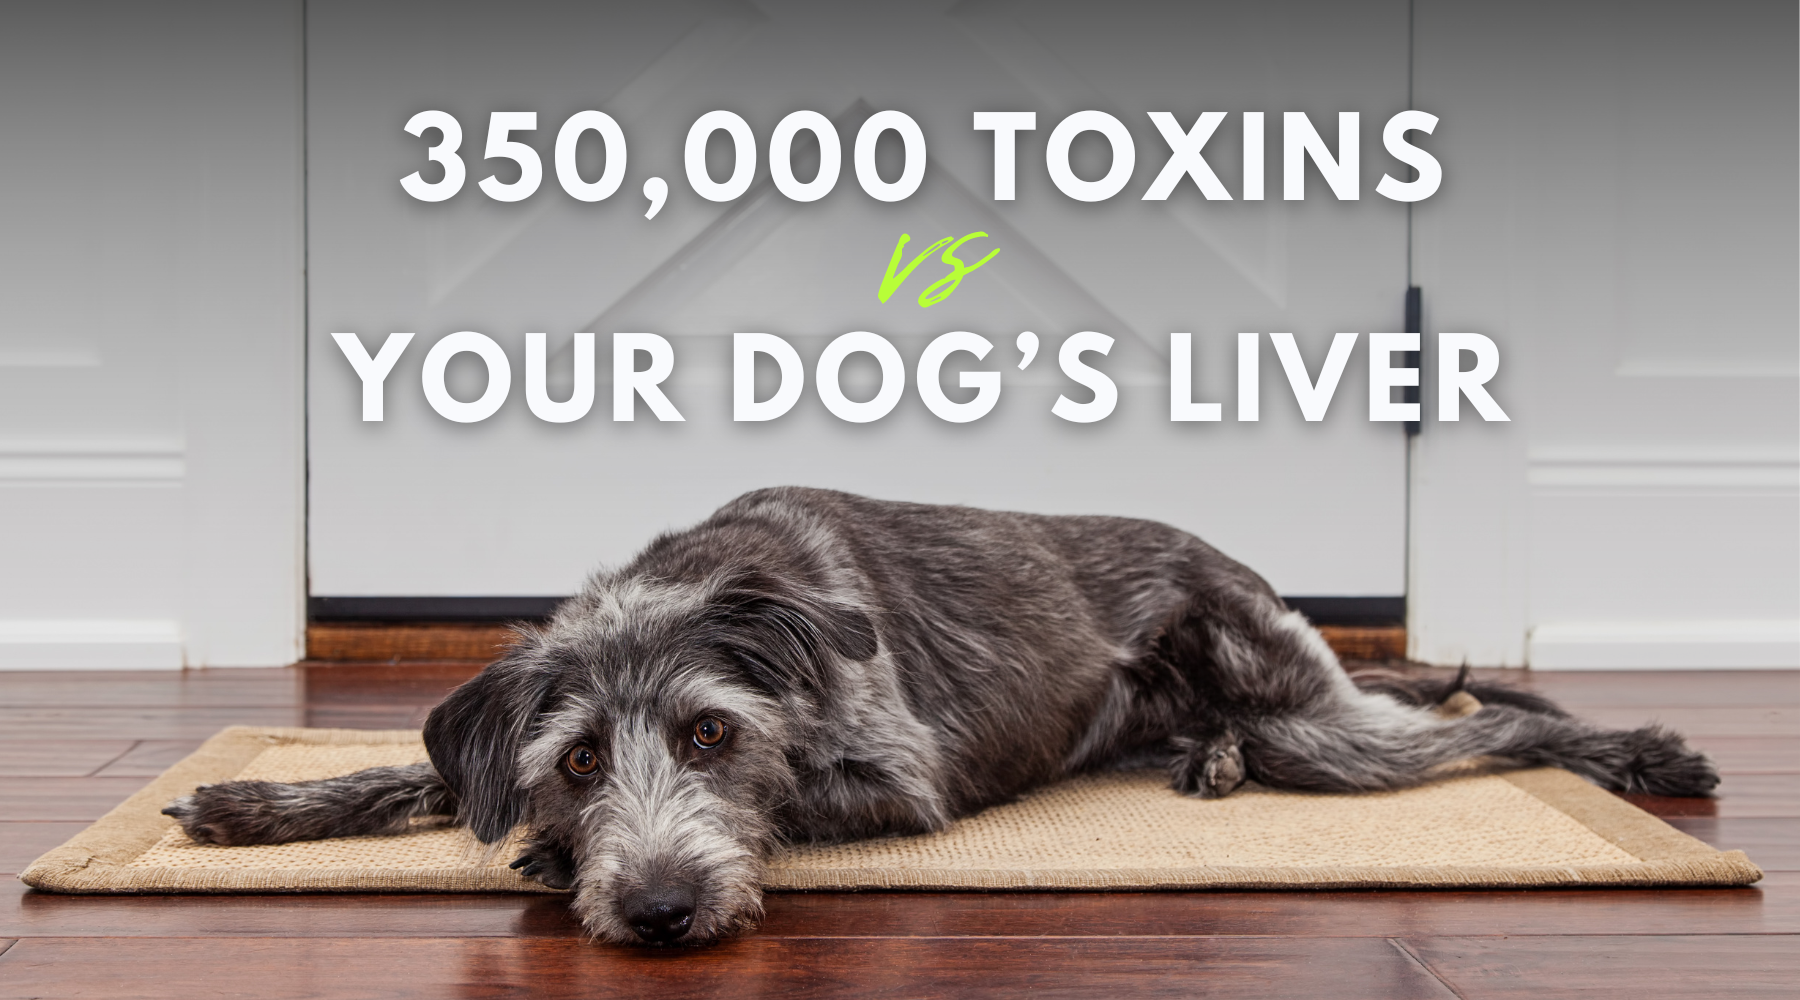 350,000 New Toxins vs. Your Dog's Liver